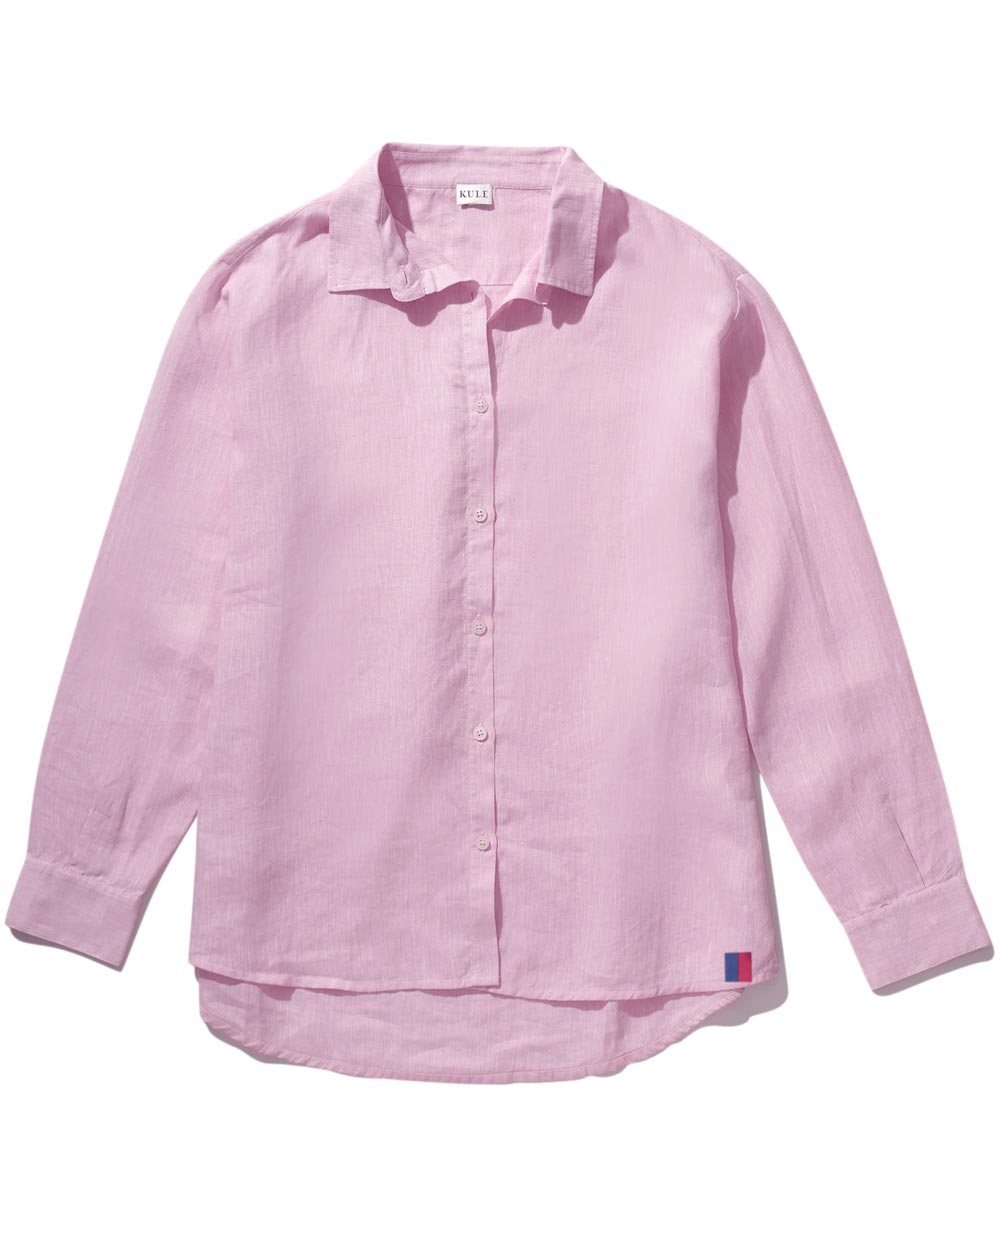 The Hutton Button Down Shirt in Pink